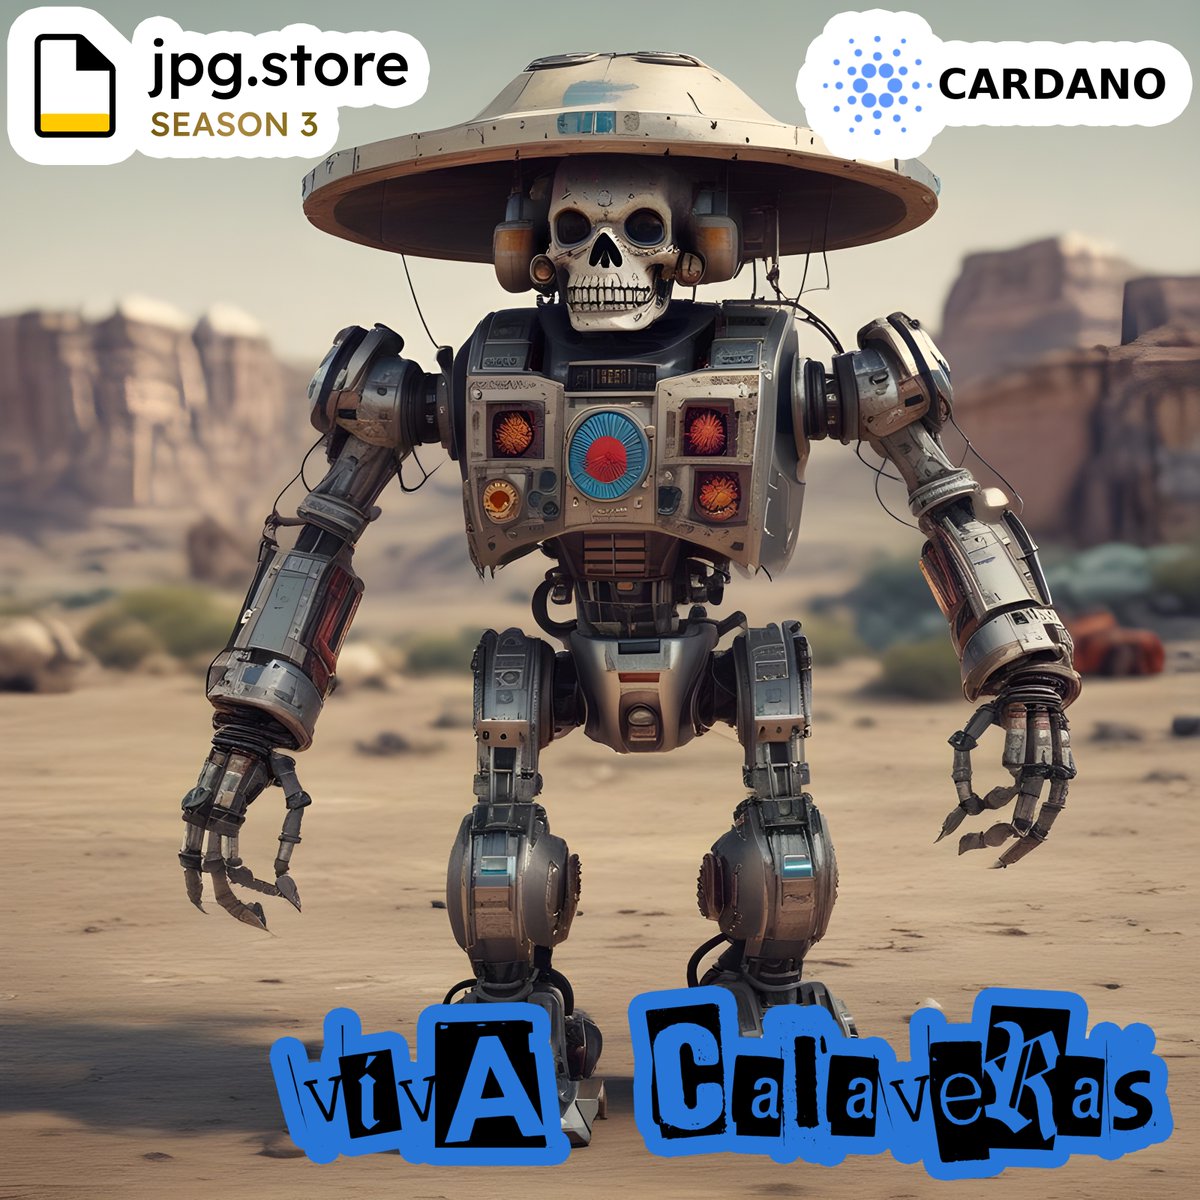 Viva Calaveras on Cardano via jpg.store ! These NFTs can be redeemed for a signed 3D printed K-SCOPES® Trading Card.

Proto
jpg.store/listing/226770…

#cardano #ADA #CardanoNFT #CardanoCommunity #NFT #vivacalaveras #calaveras #kscopes #tradingcards #3dprinting #AI